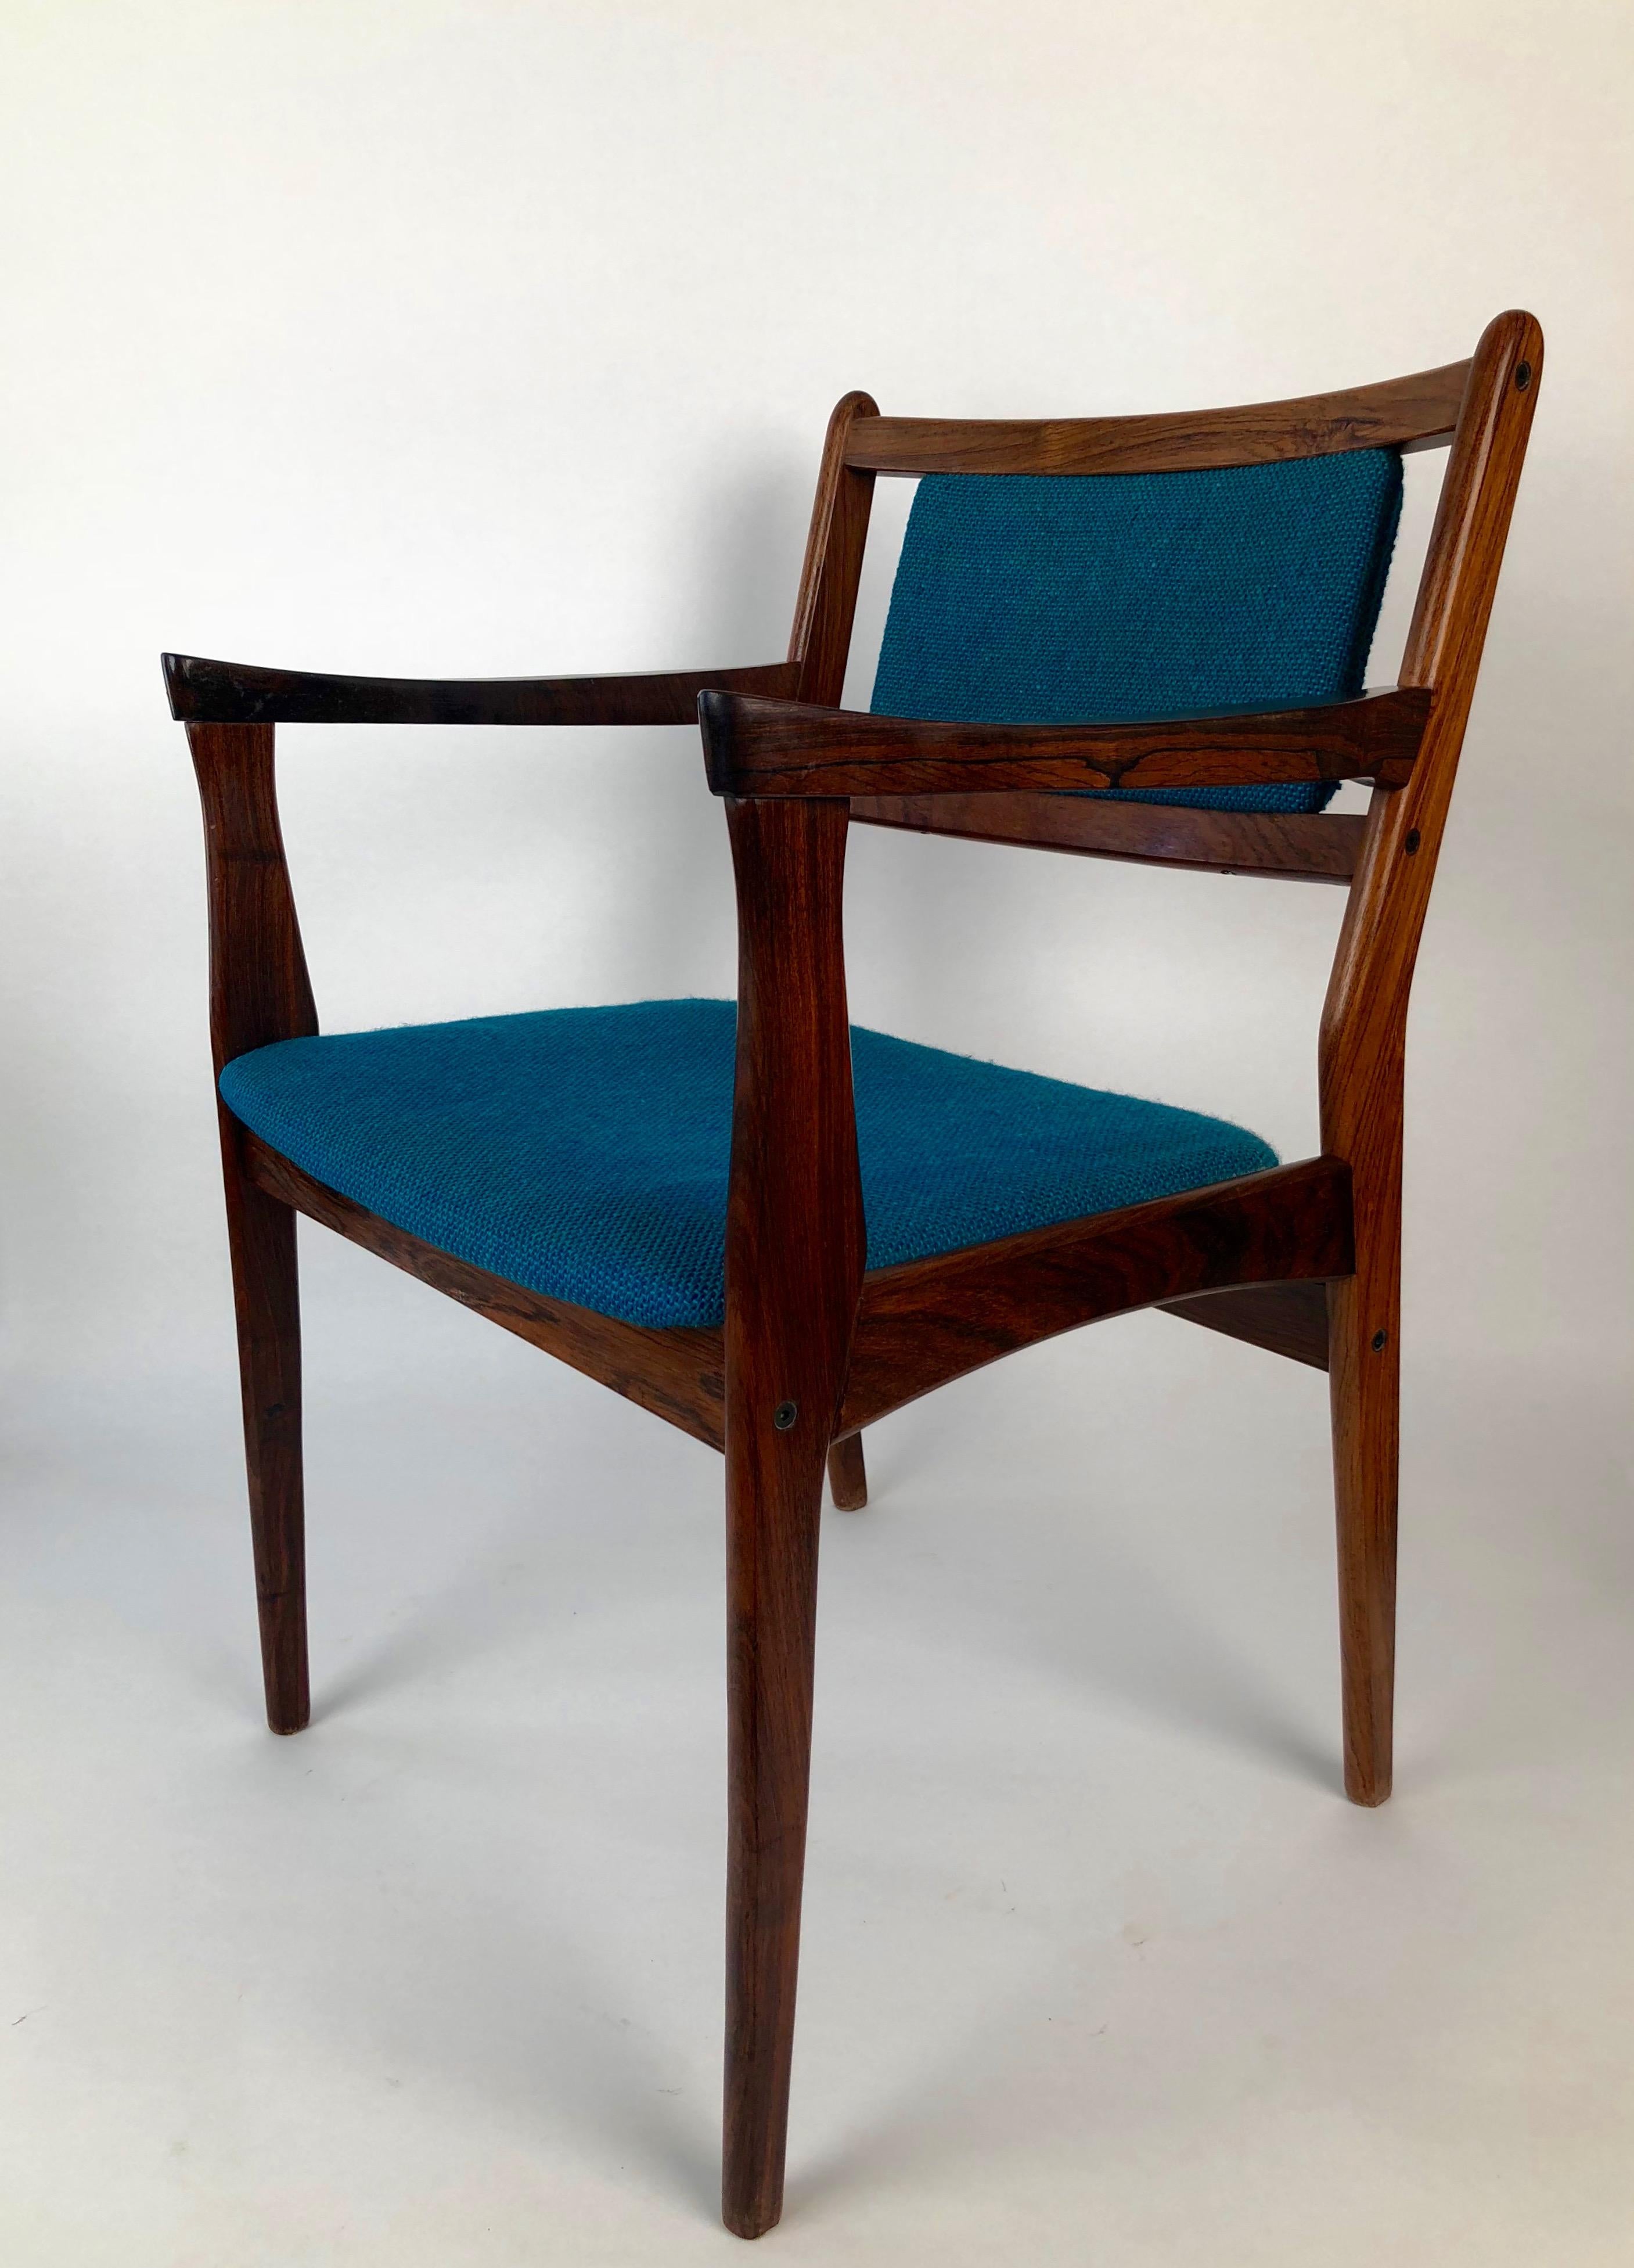 Set of Two Palisander Chairs with Turquoise Fabric from the 1960s For Sale 3